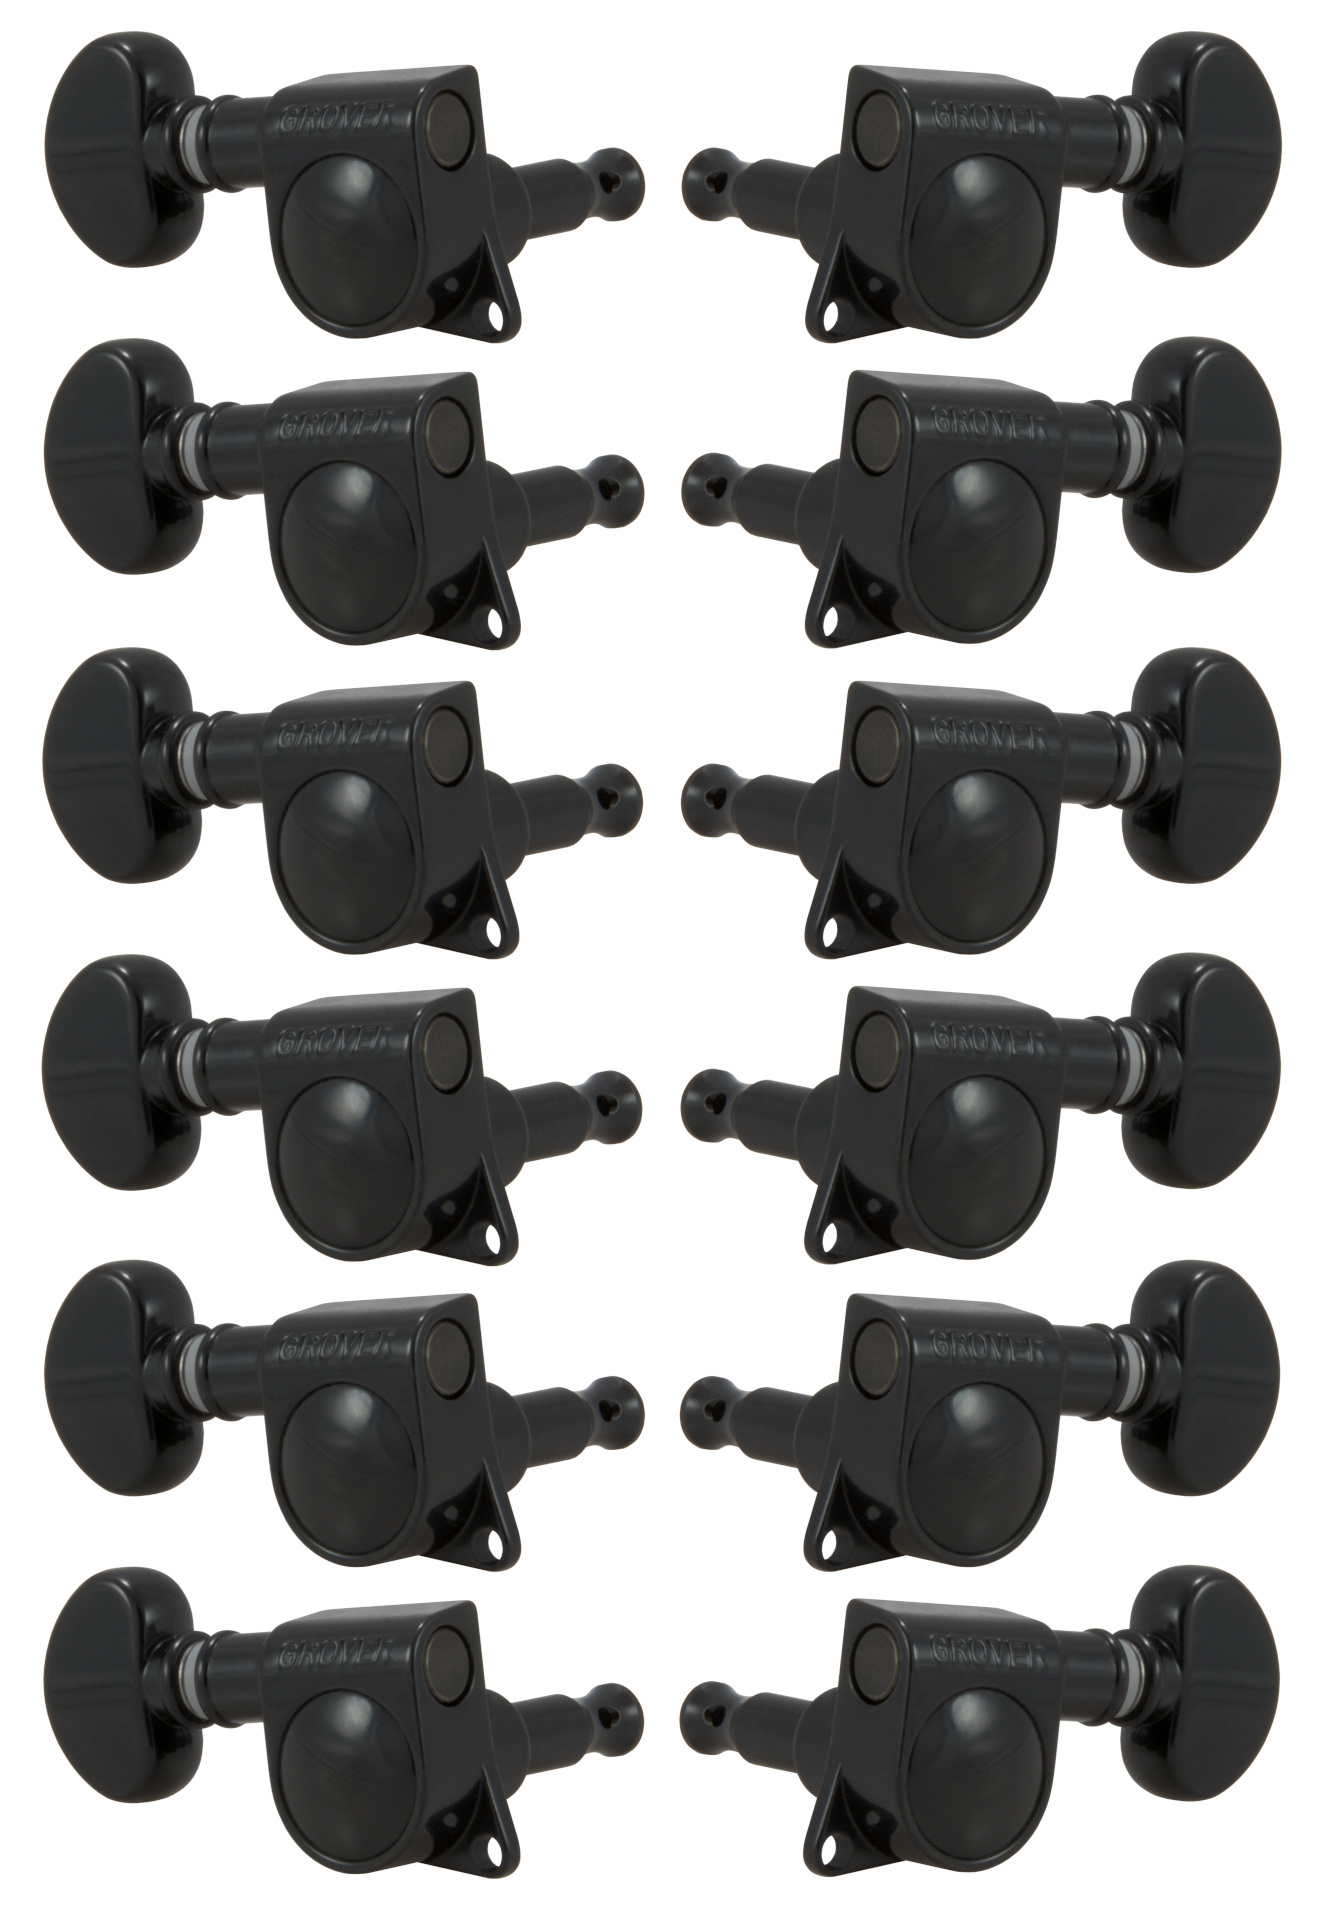 Grover 305BC12 Mid-Size Rotomatics with Round Button - 12-String Guitar Machine Heads, 6 + 6 - Black Chrome